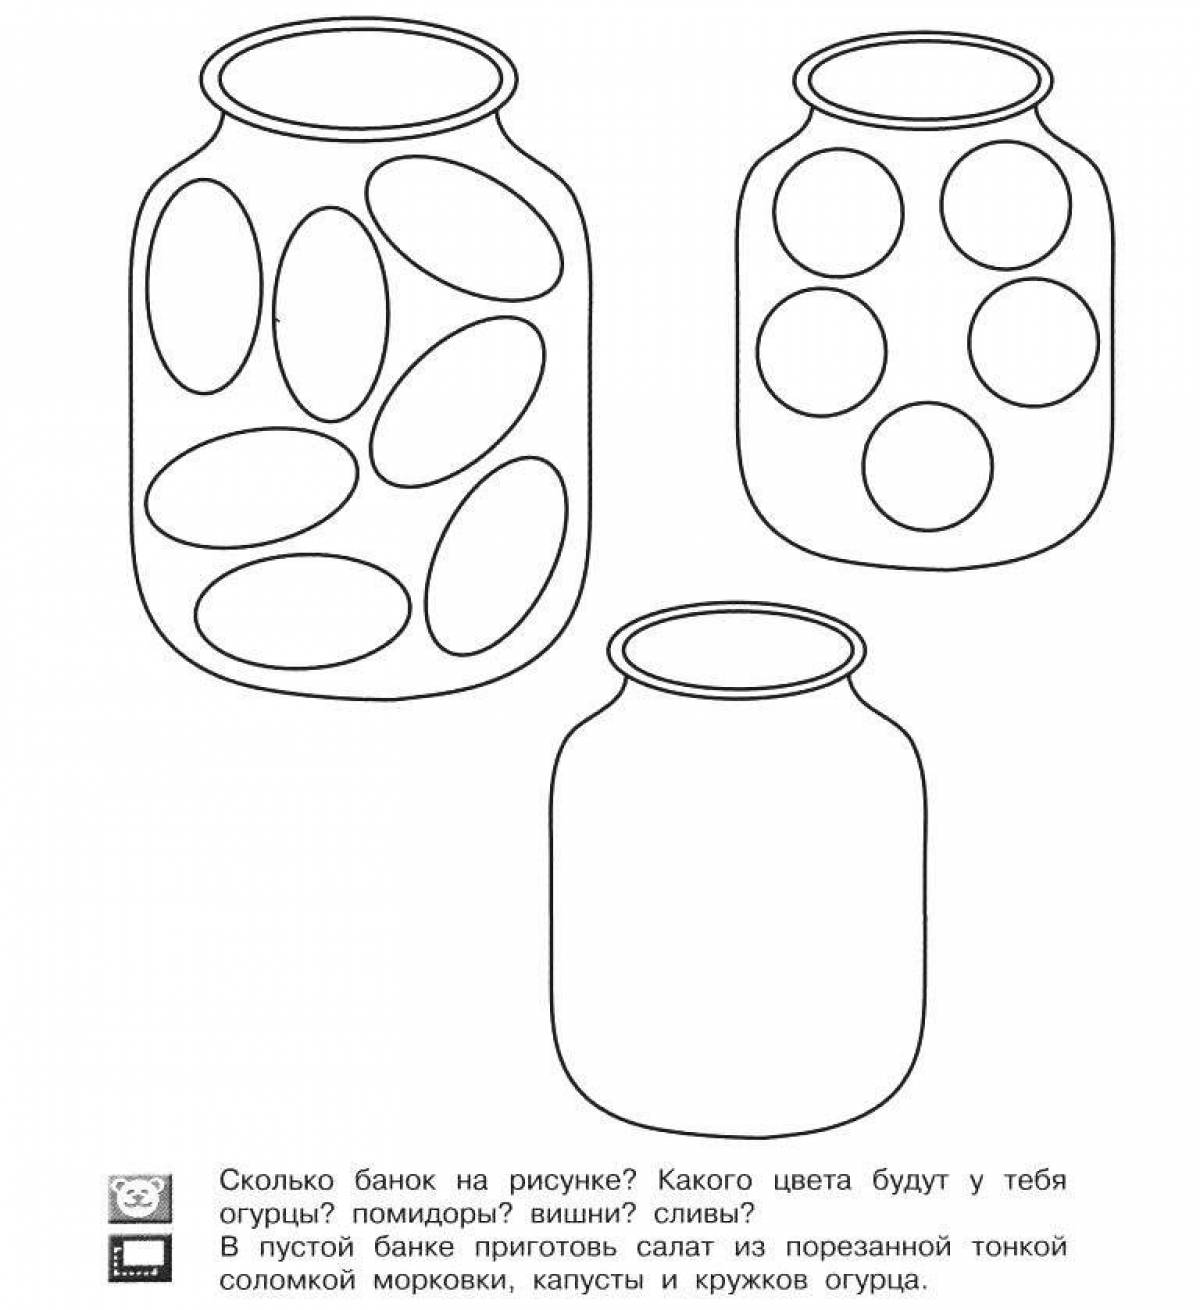 Awesome jar coloring page